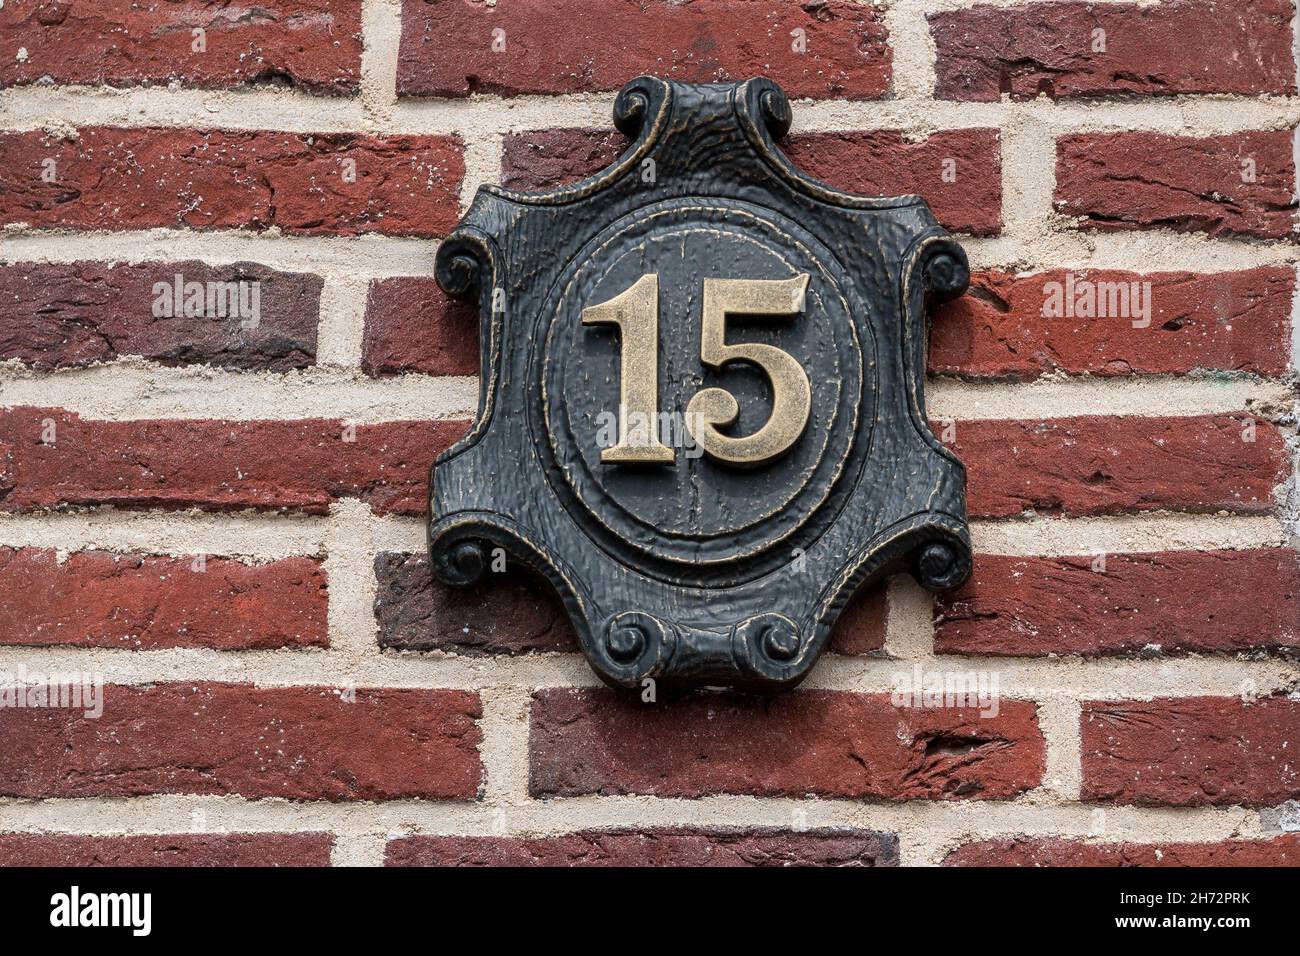 House number made of metal on a brick wall Stock Photo